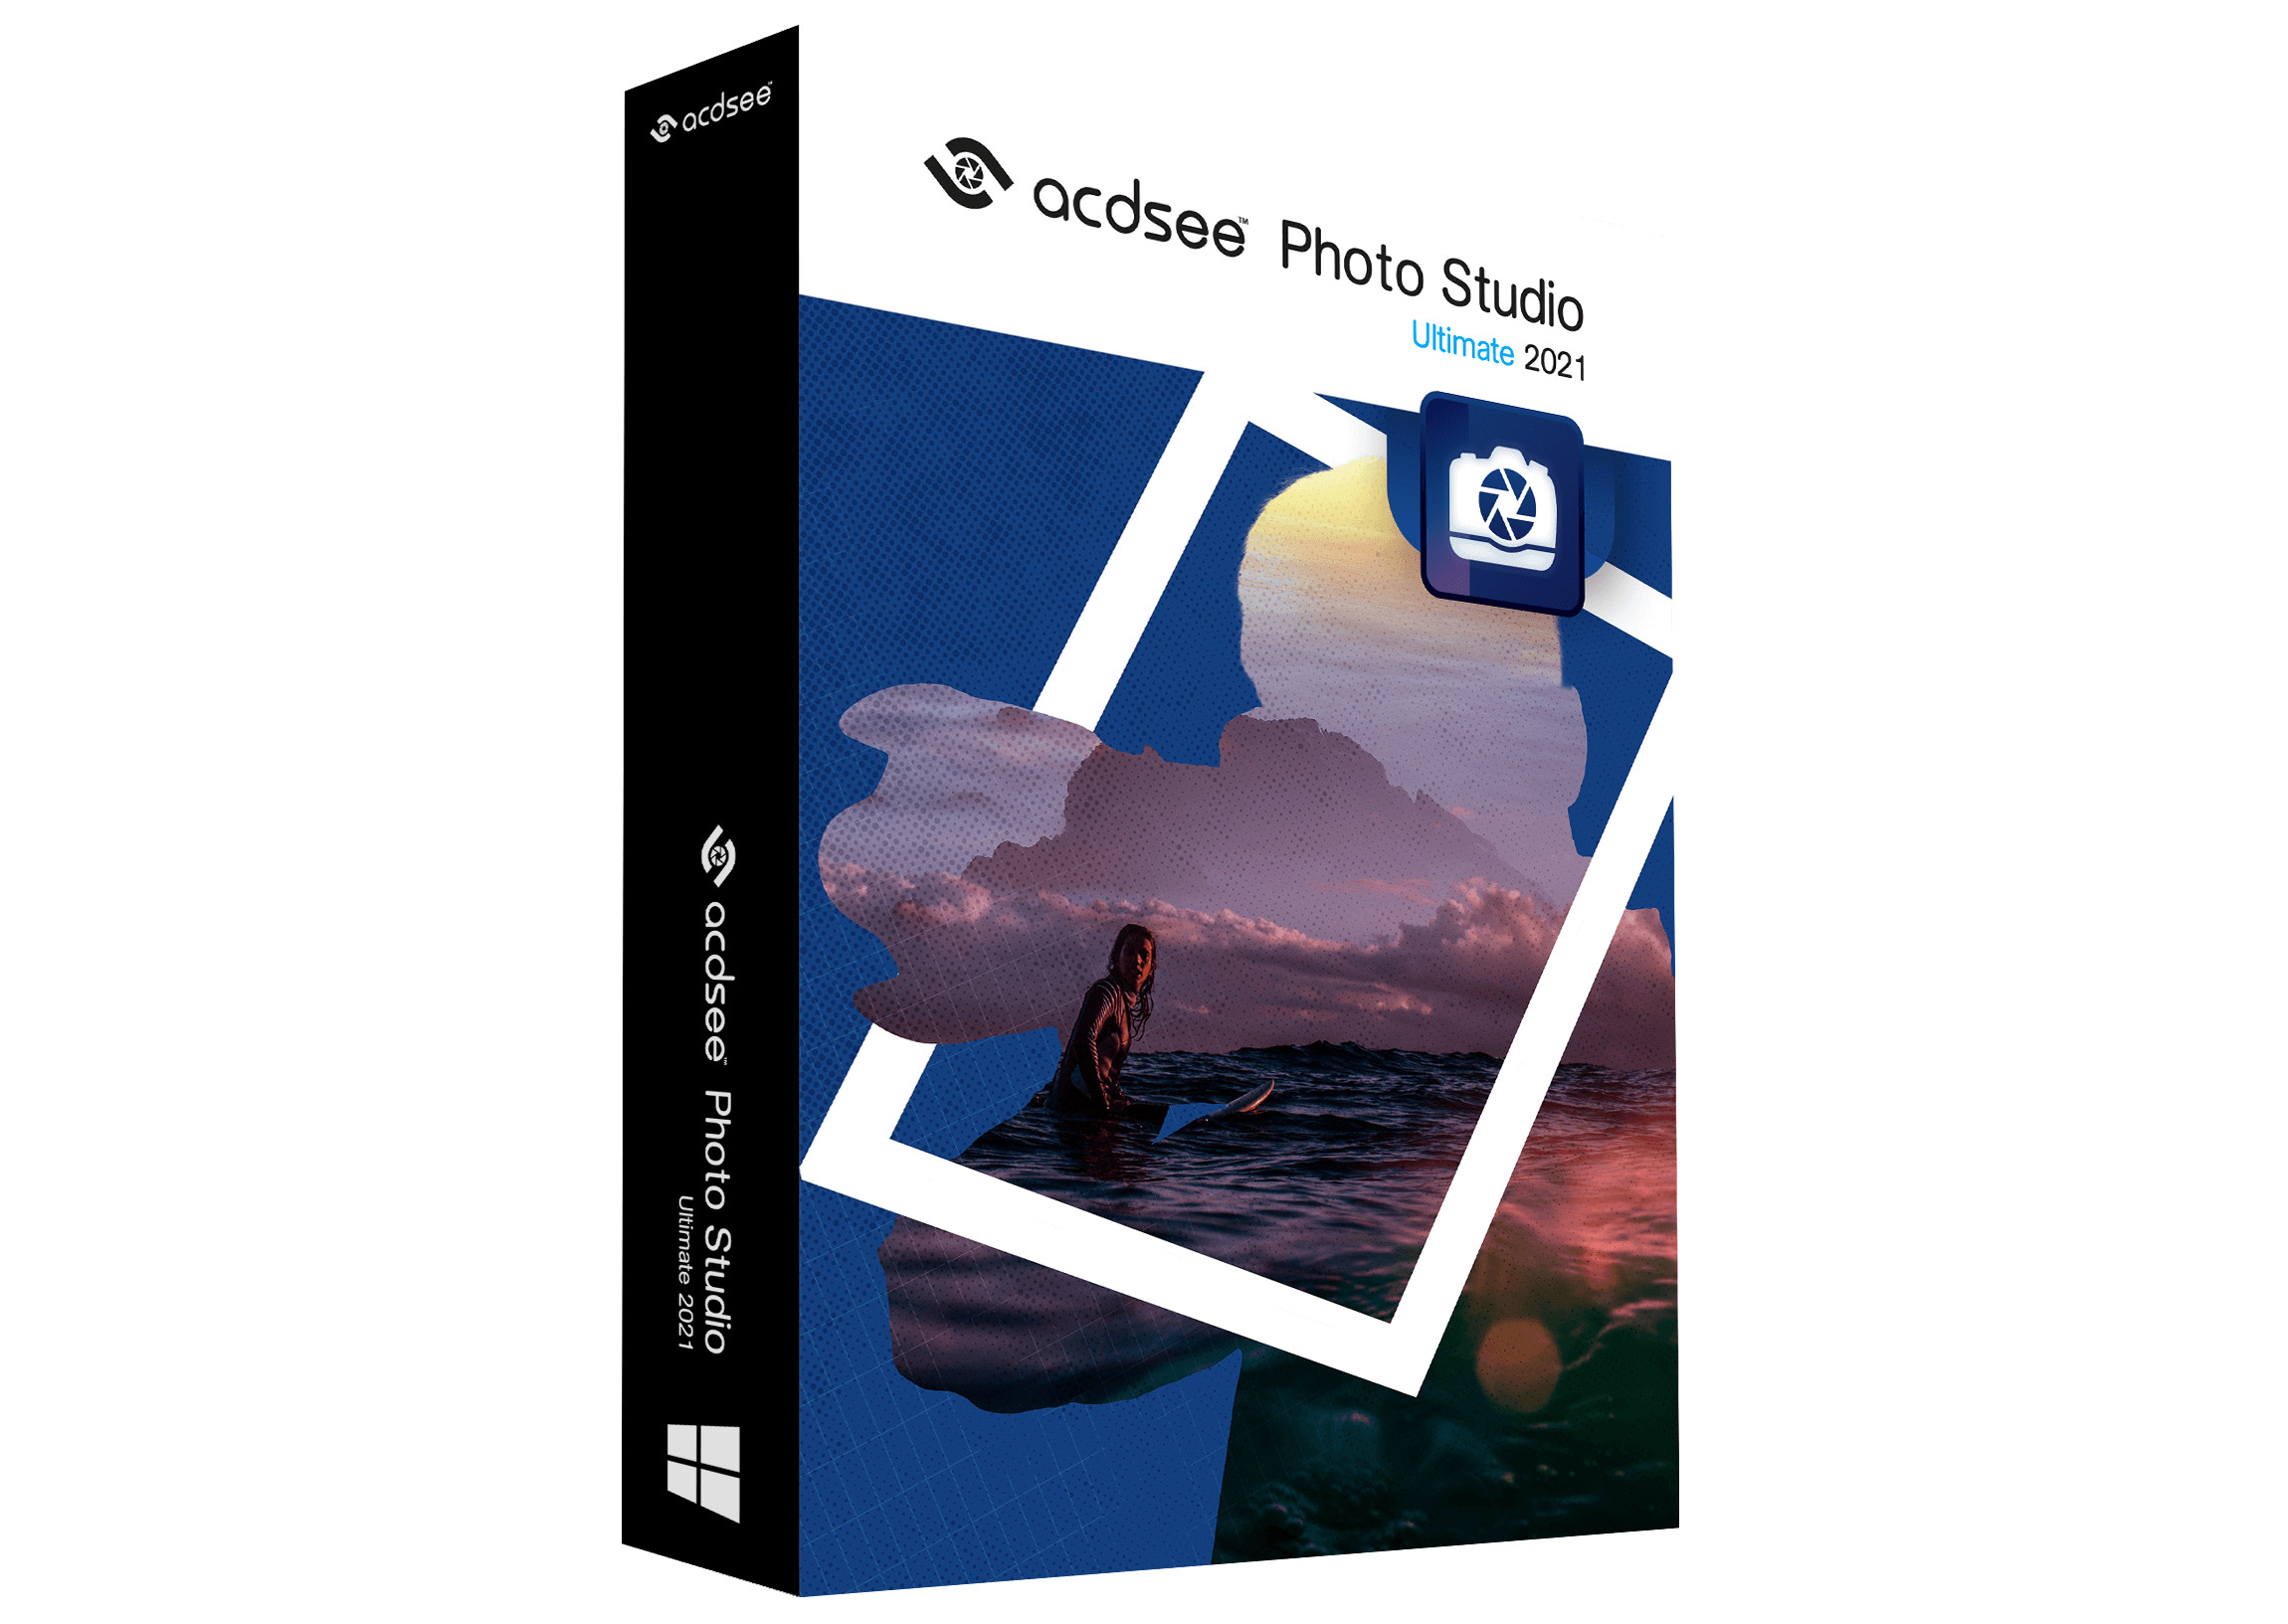 ACDSee Photo Studio Ultimate 2021 Key (6 Months / 1 PC) 11.29$